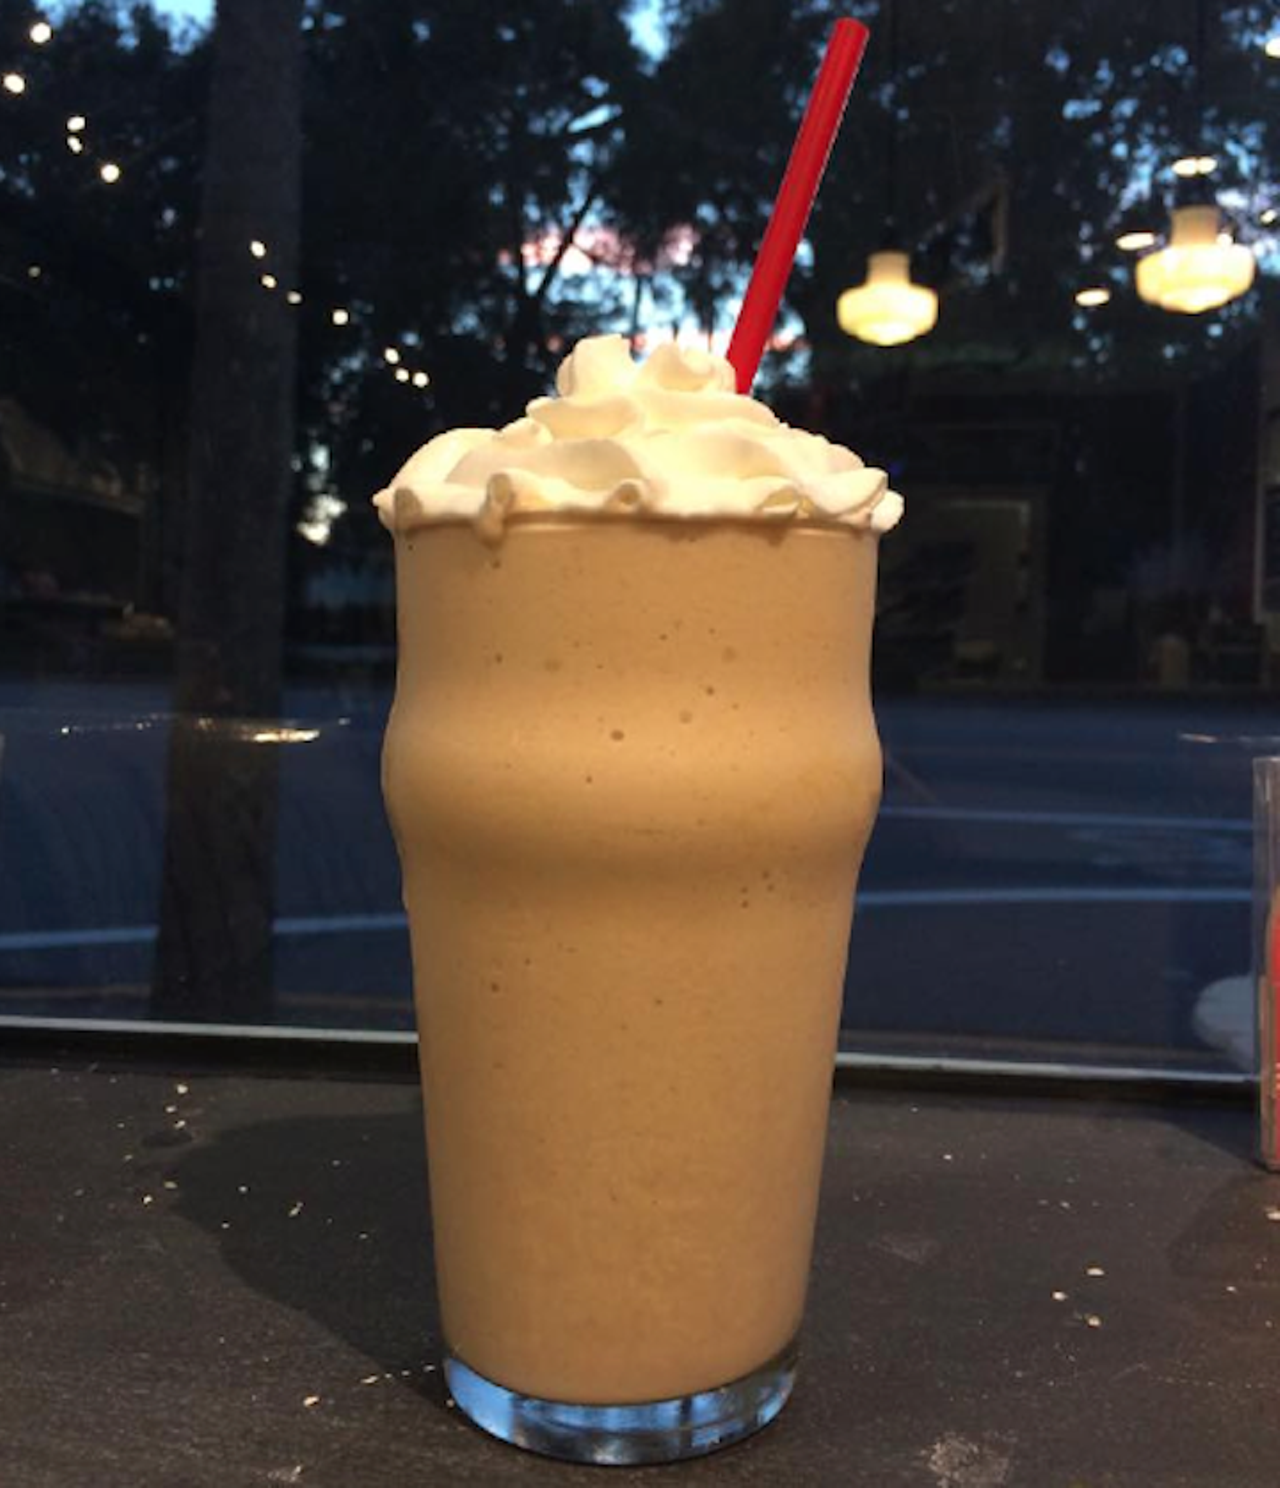 The Soda Fountain
2525 Edgewater Drive; 407-540-1006
If you&#146;re dedicated enough, thin mint season never has to be over. The Soda Fountain, with their milkshake version of the classic Girl Scouts treat, has made sure of it.
Photo via The Soda Fountain/Facebook